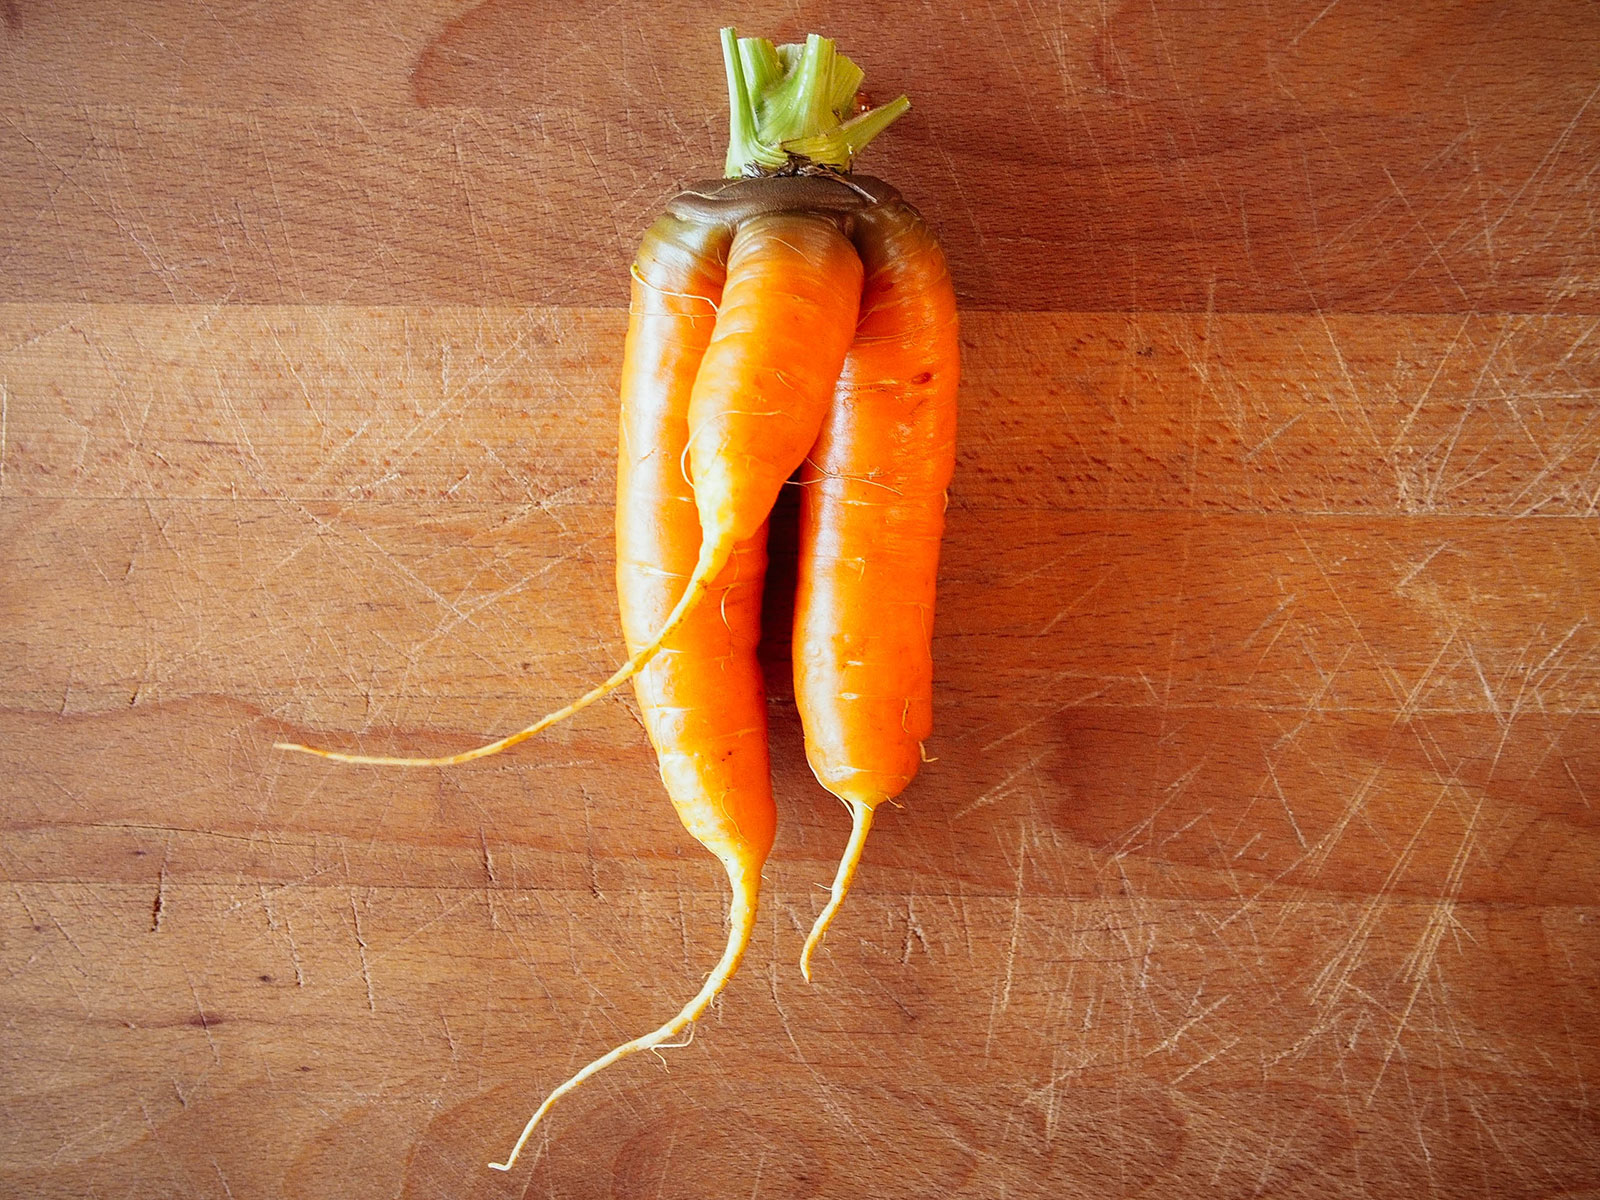 An orange carrot on a wooden cutting board with two long legs and a shorter, stout leg between them